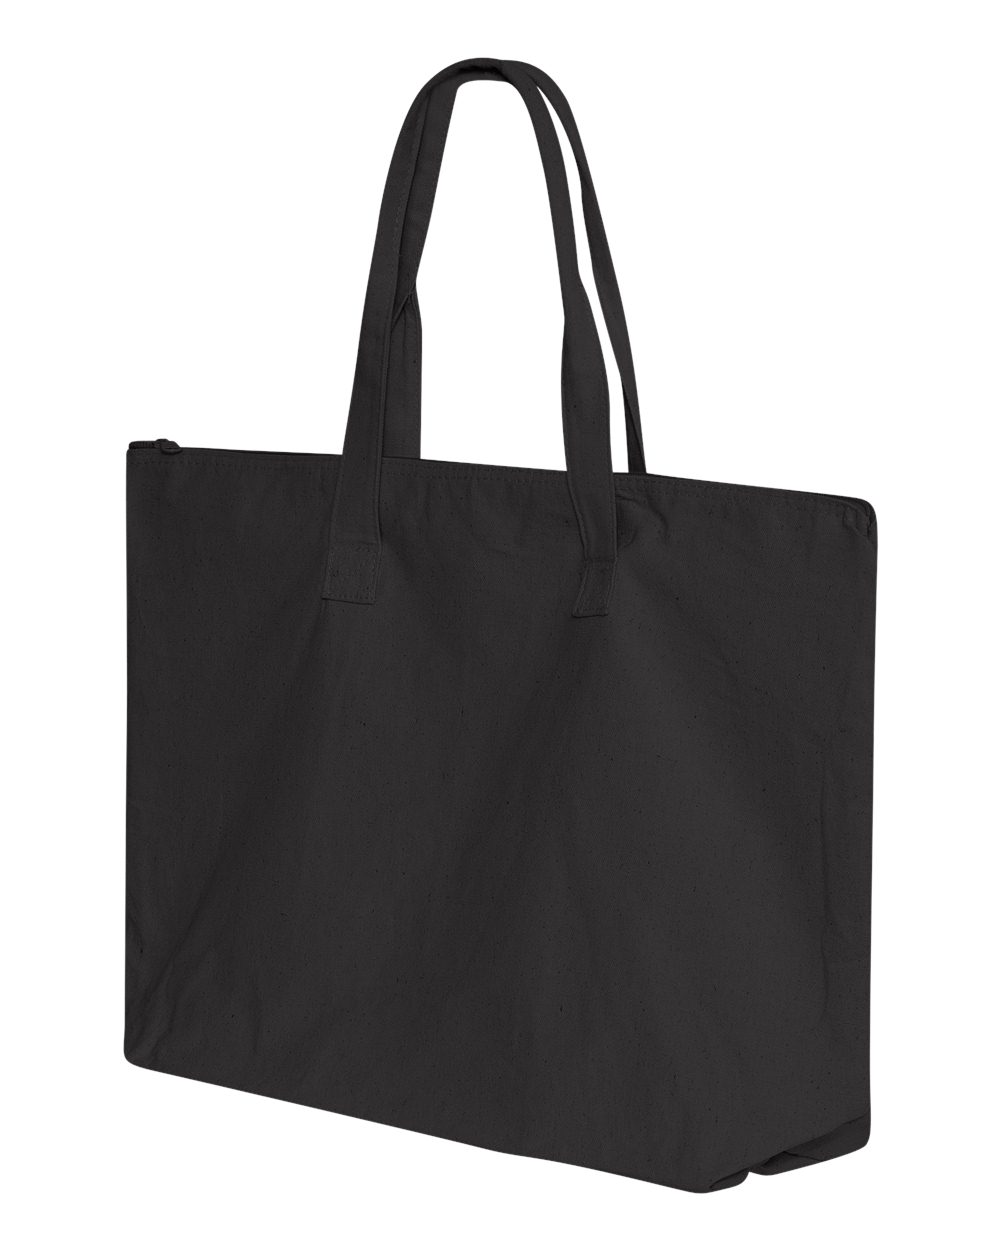 Liberty Bags 8863-10 Ounce Canvas Tote with Zipper Top Closure $4.39 - Bags